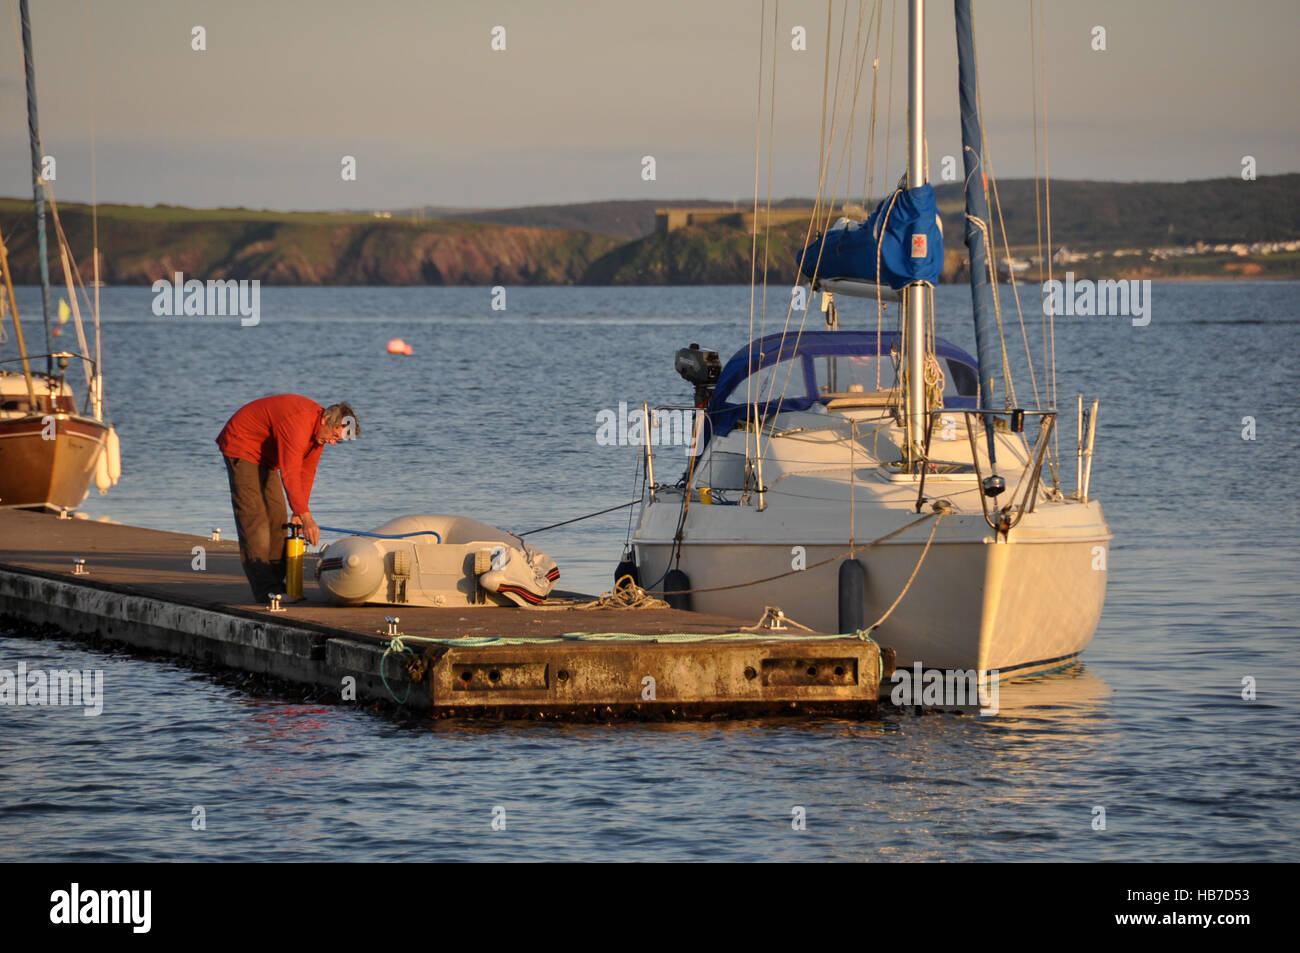 Yachtsman inflating his dinghy at Dale outer pontoon before going ashore Stock Photo